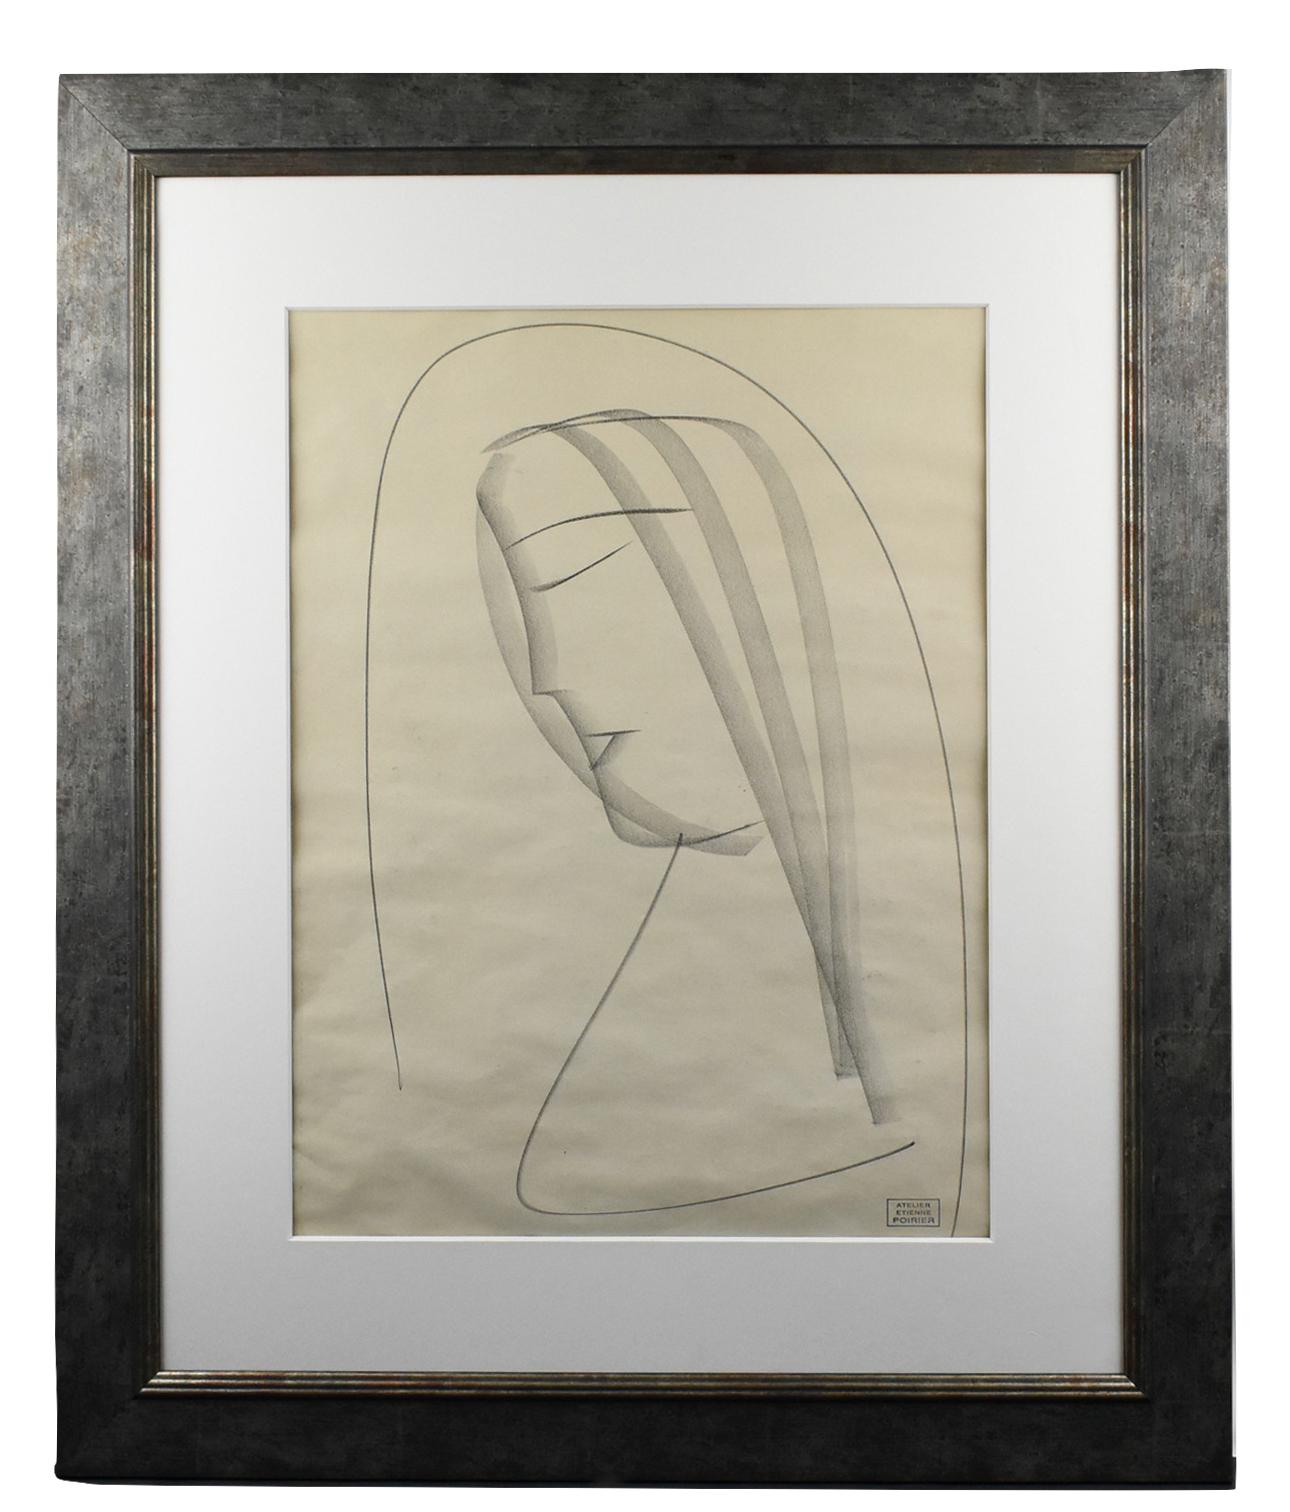 Stunning charcoal drawing by French artist Etienne Poirier (1919-2002). This work is a charcoal on paper composition depicting a nun portrait. A minimalist composition where only a few lines create the portrait which gives lots of intensity and